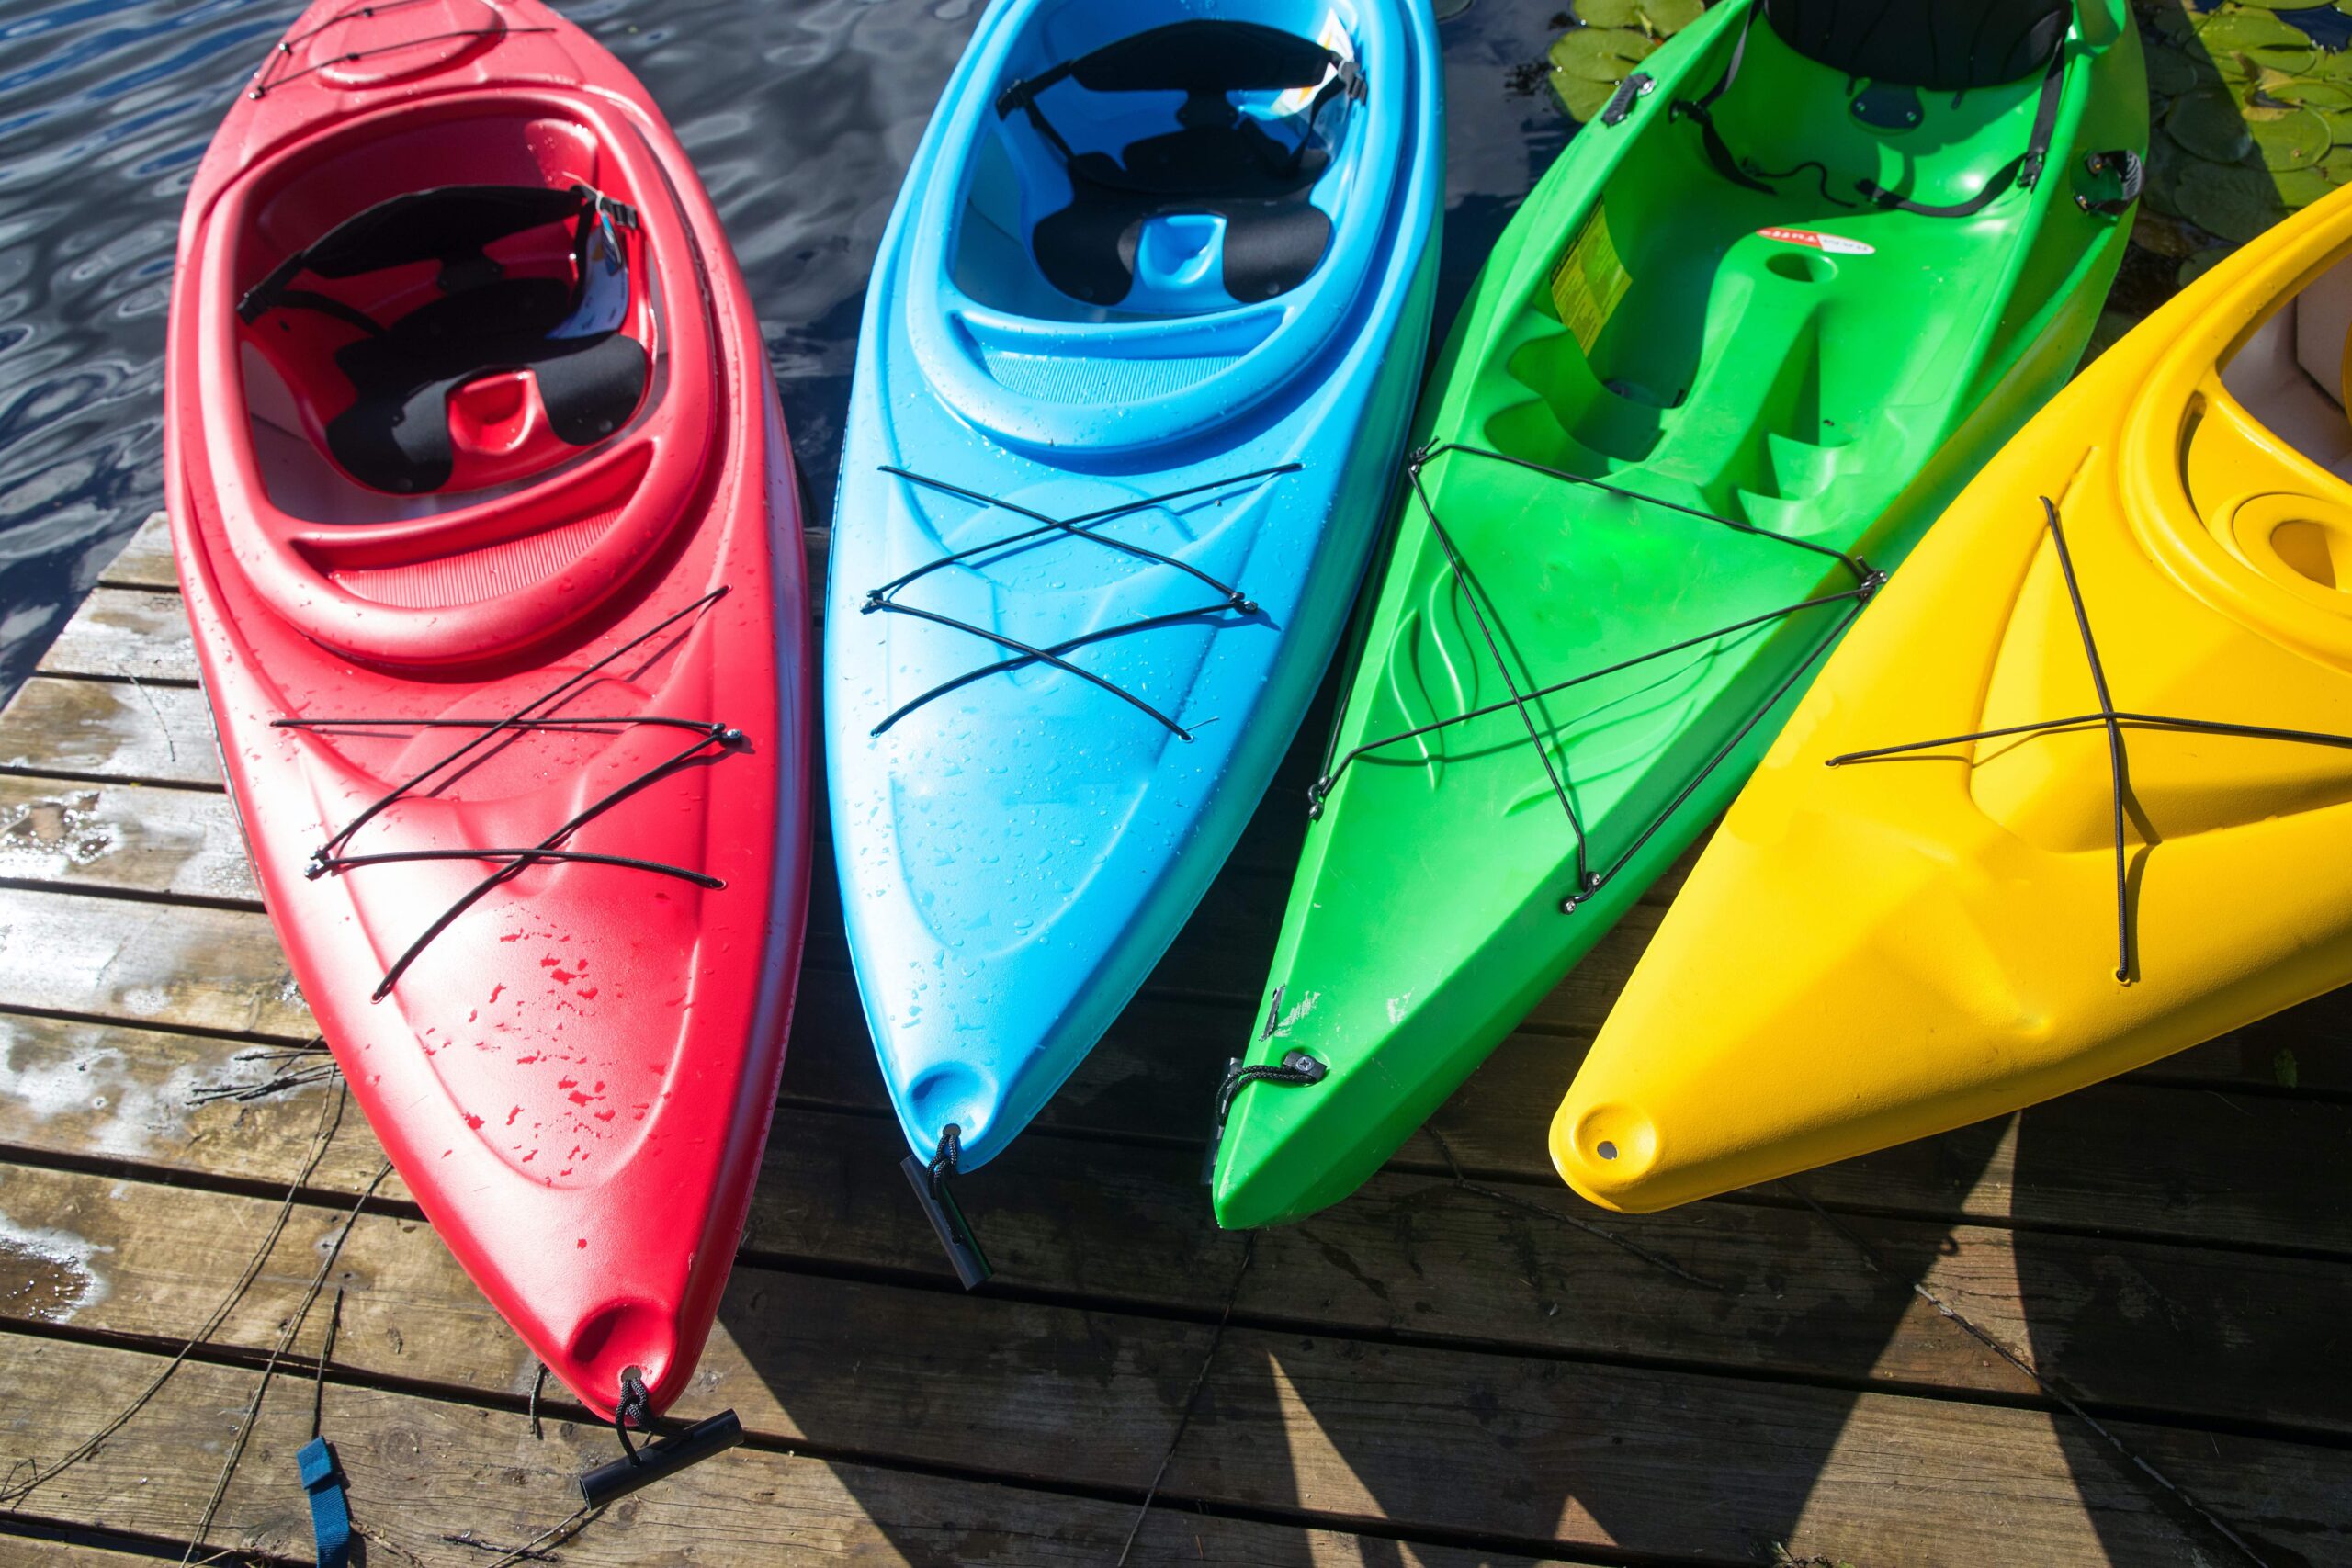 multicolored kayaks on a deck 